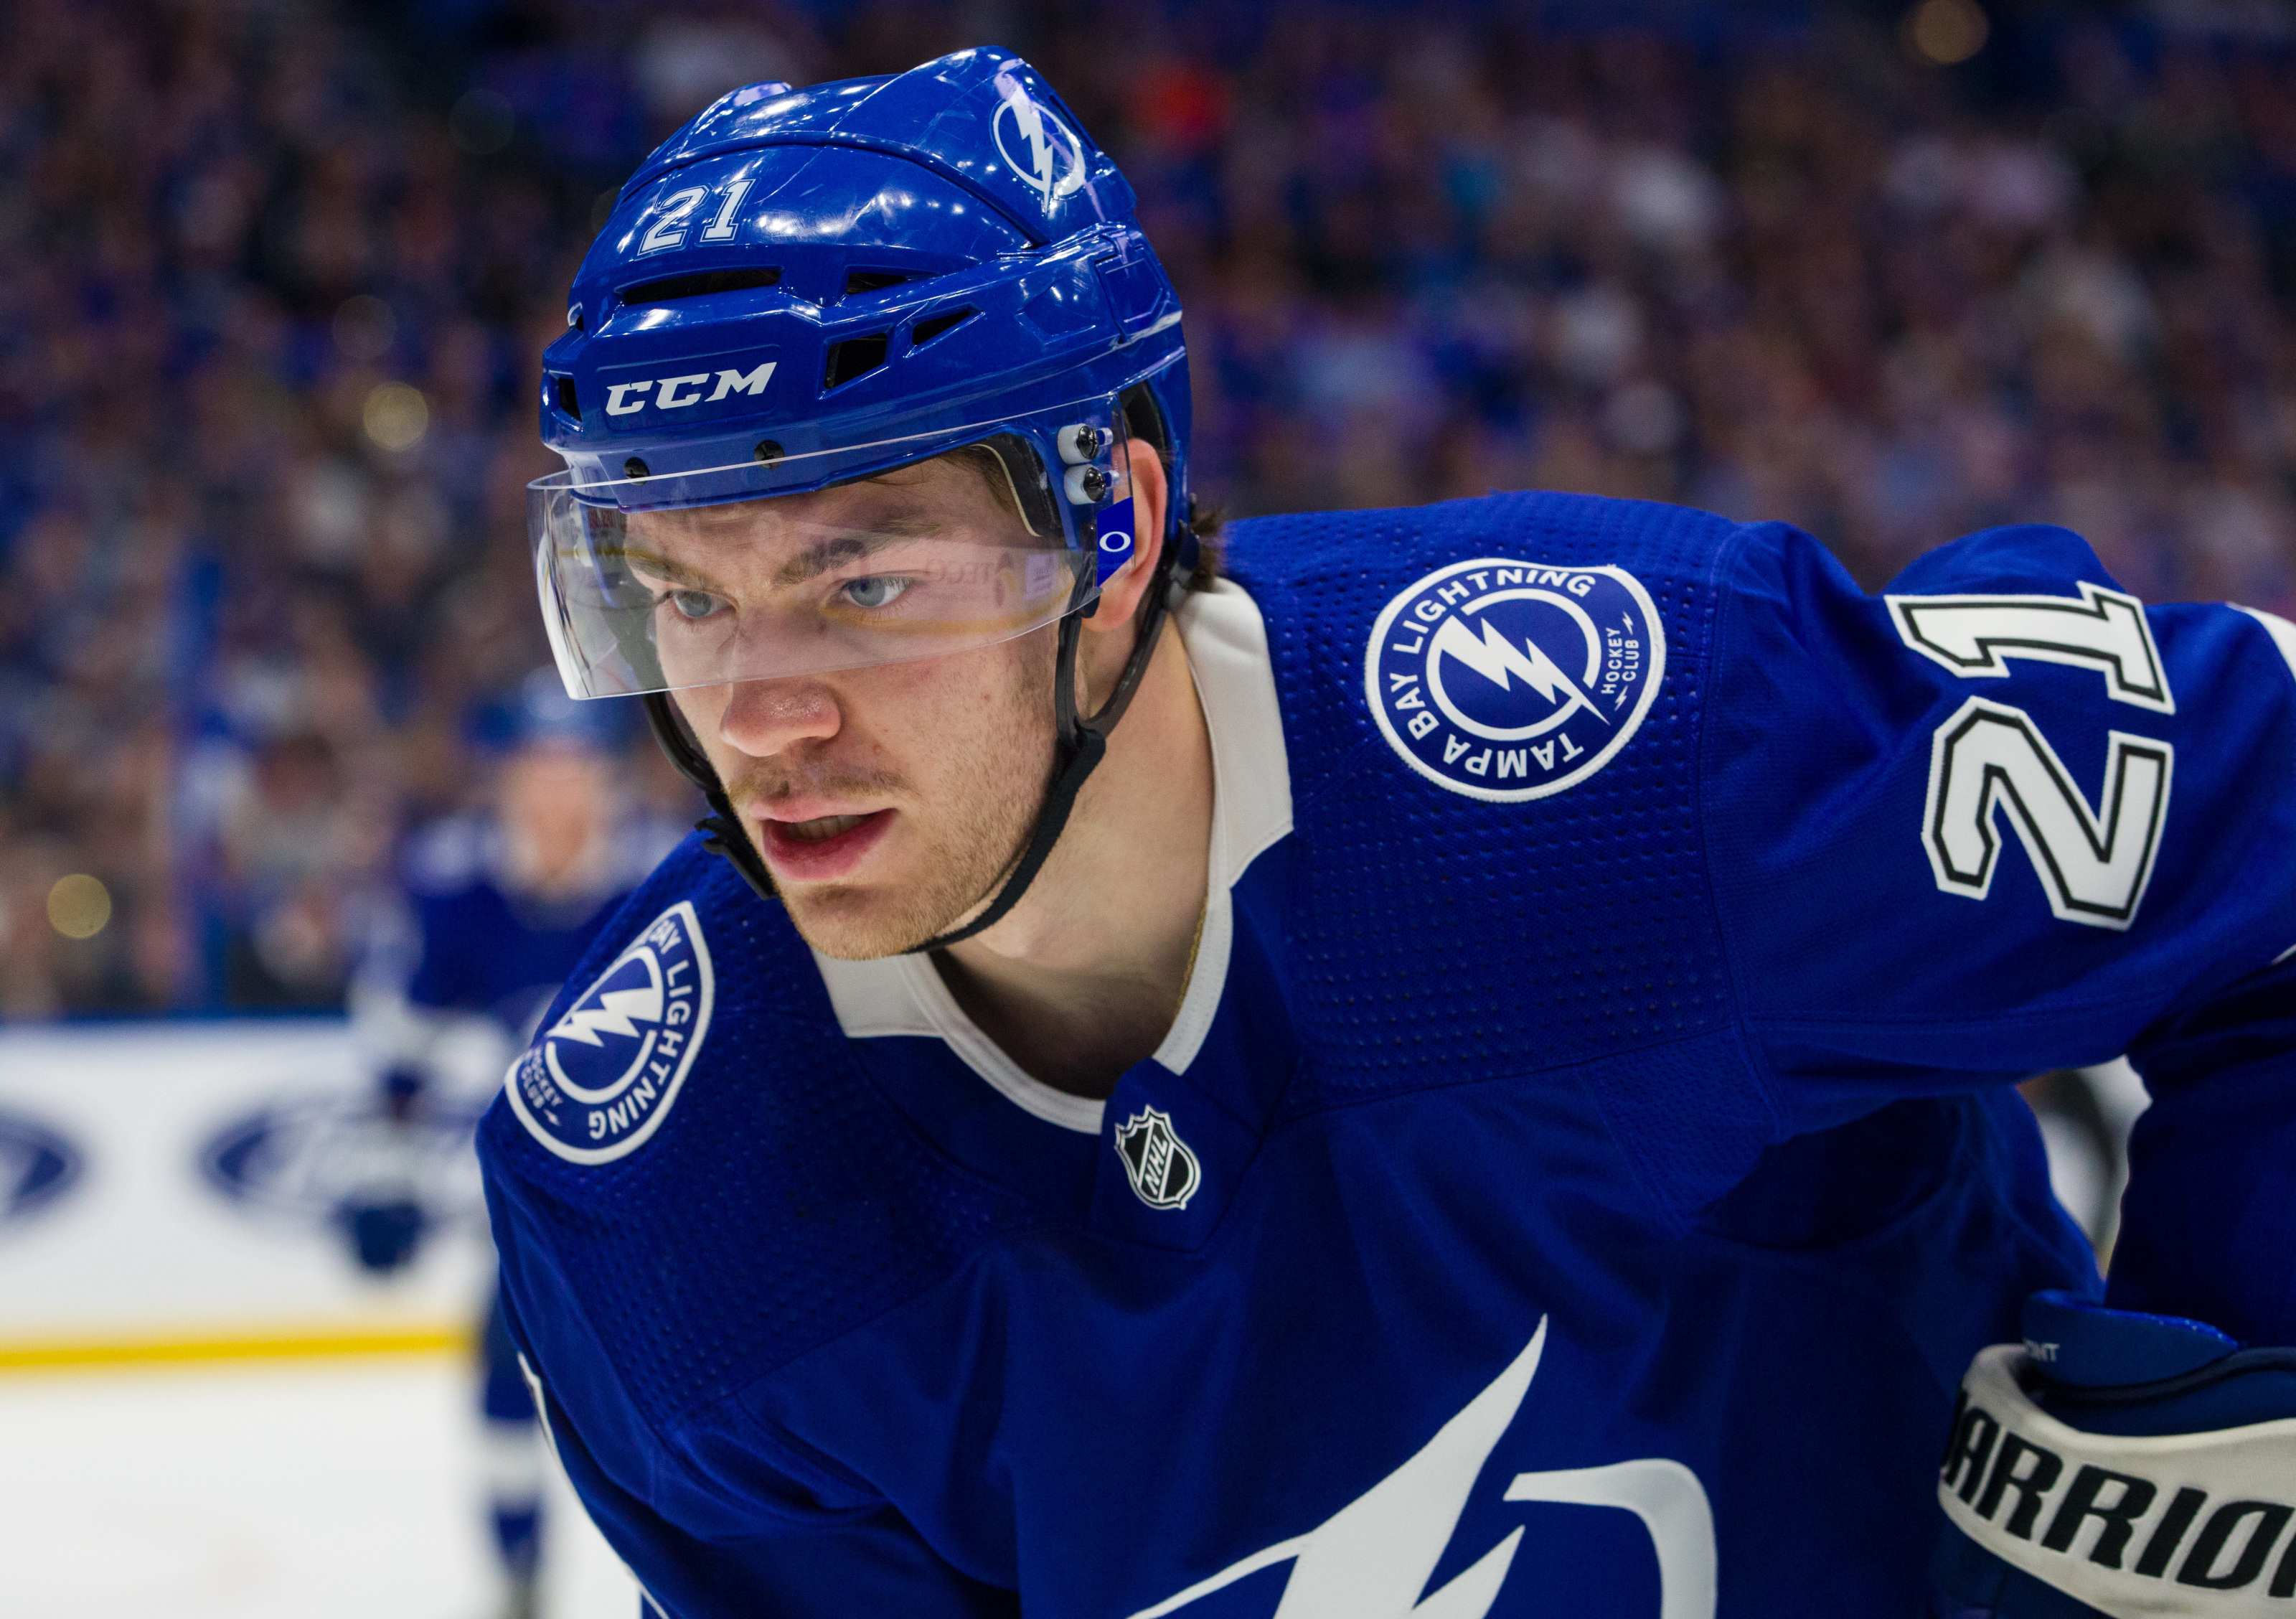 Tampa Bay Lightning F Brayden Point will not play this weekend